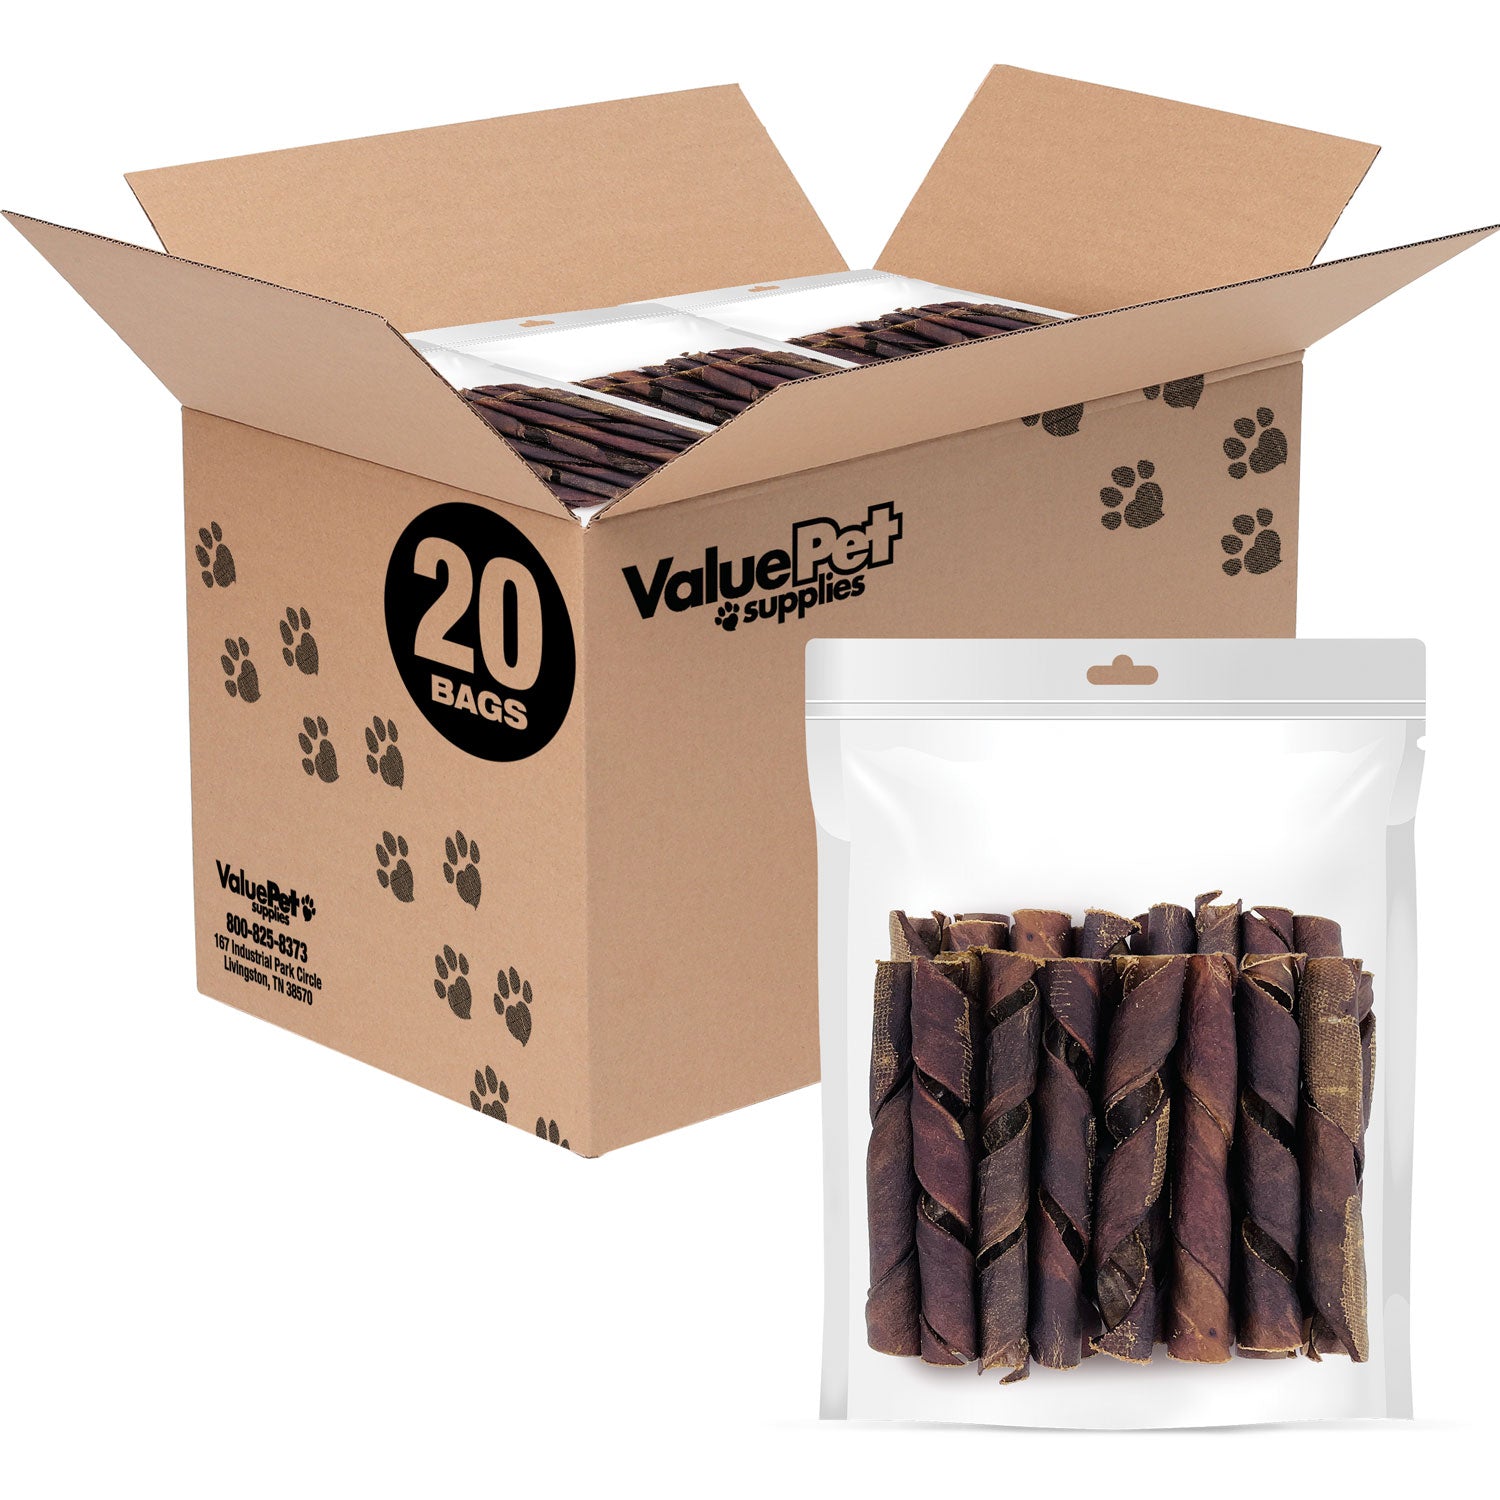 ValueBull USA Collagen Sticks For Small Dogs, Smoked, Thin Spirals, 5-6 Inch, 400 Count RESALE PACKS (20 x 20 Count)